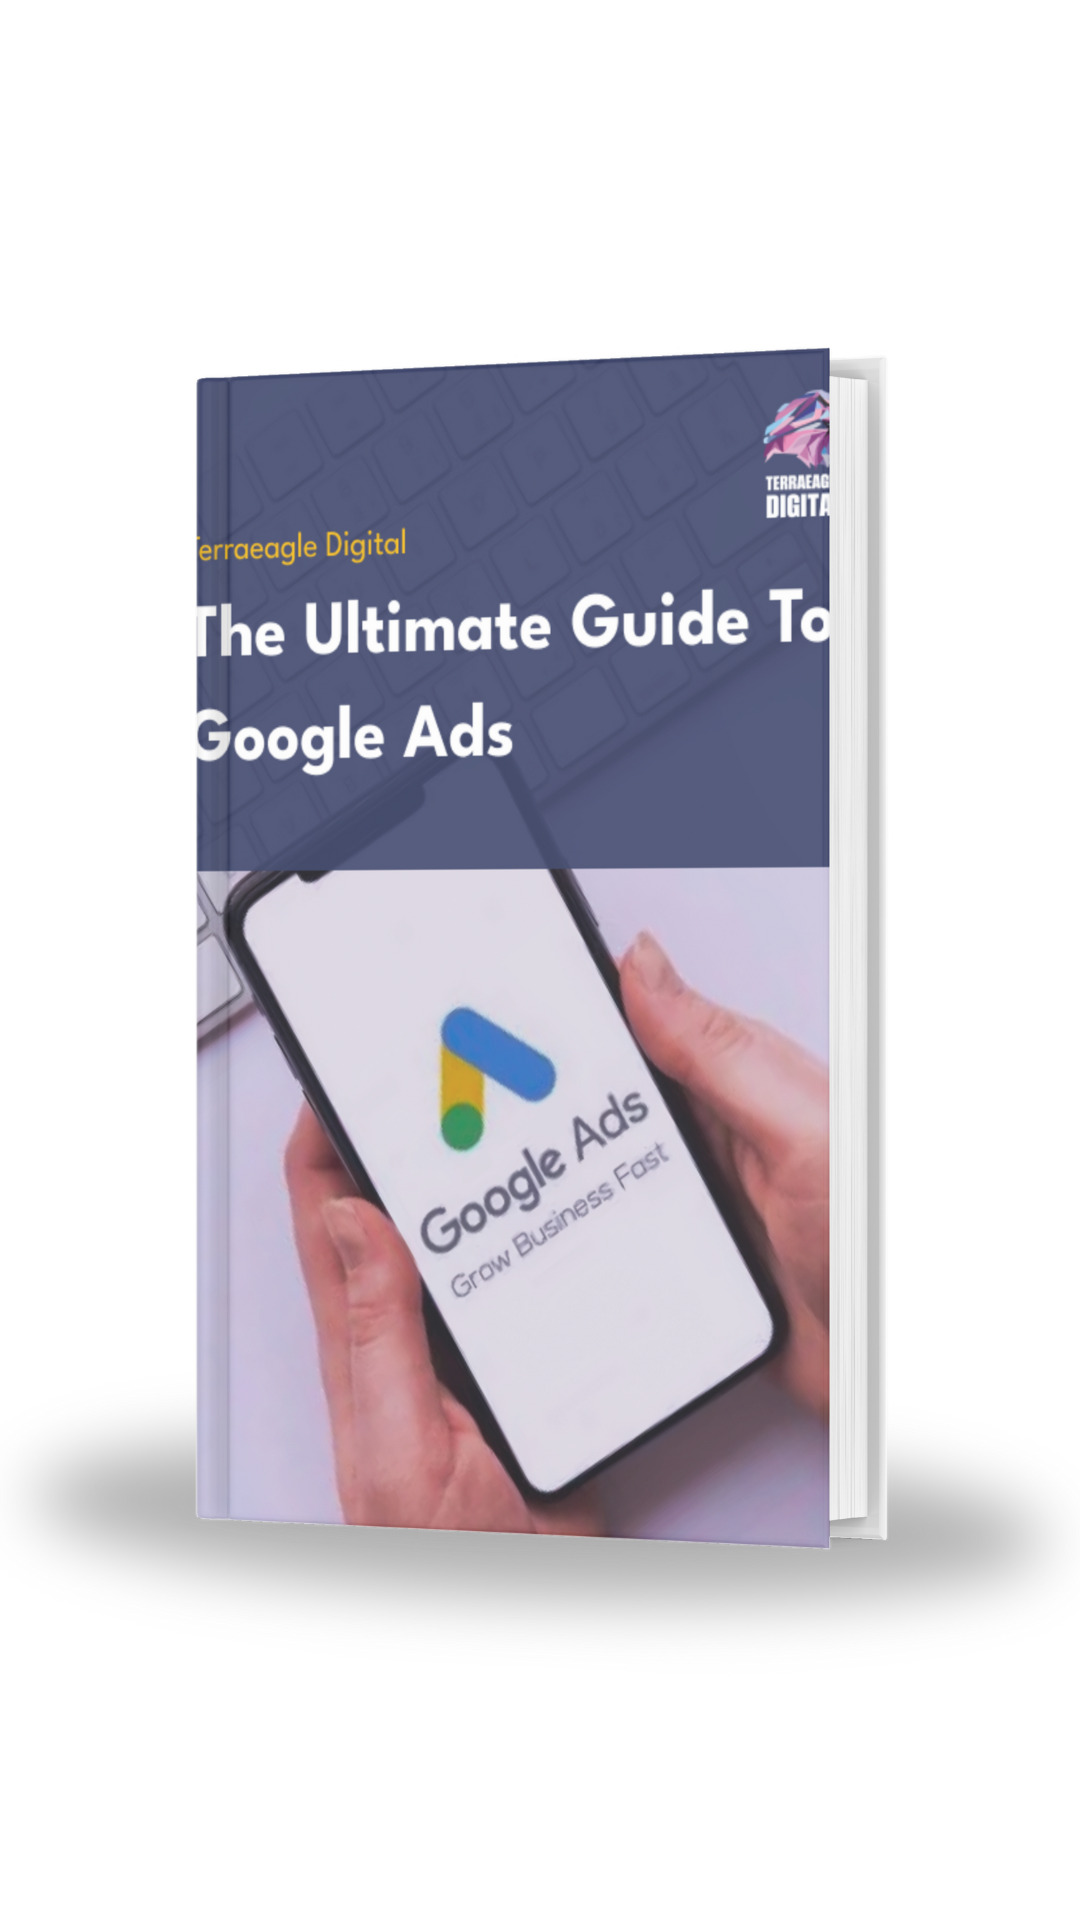 The ultimate guide to Google Ads